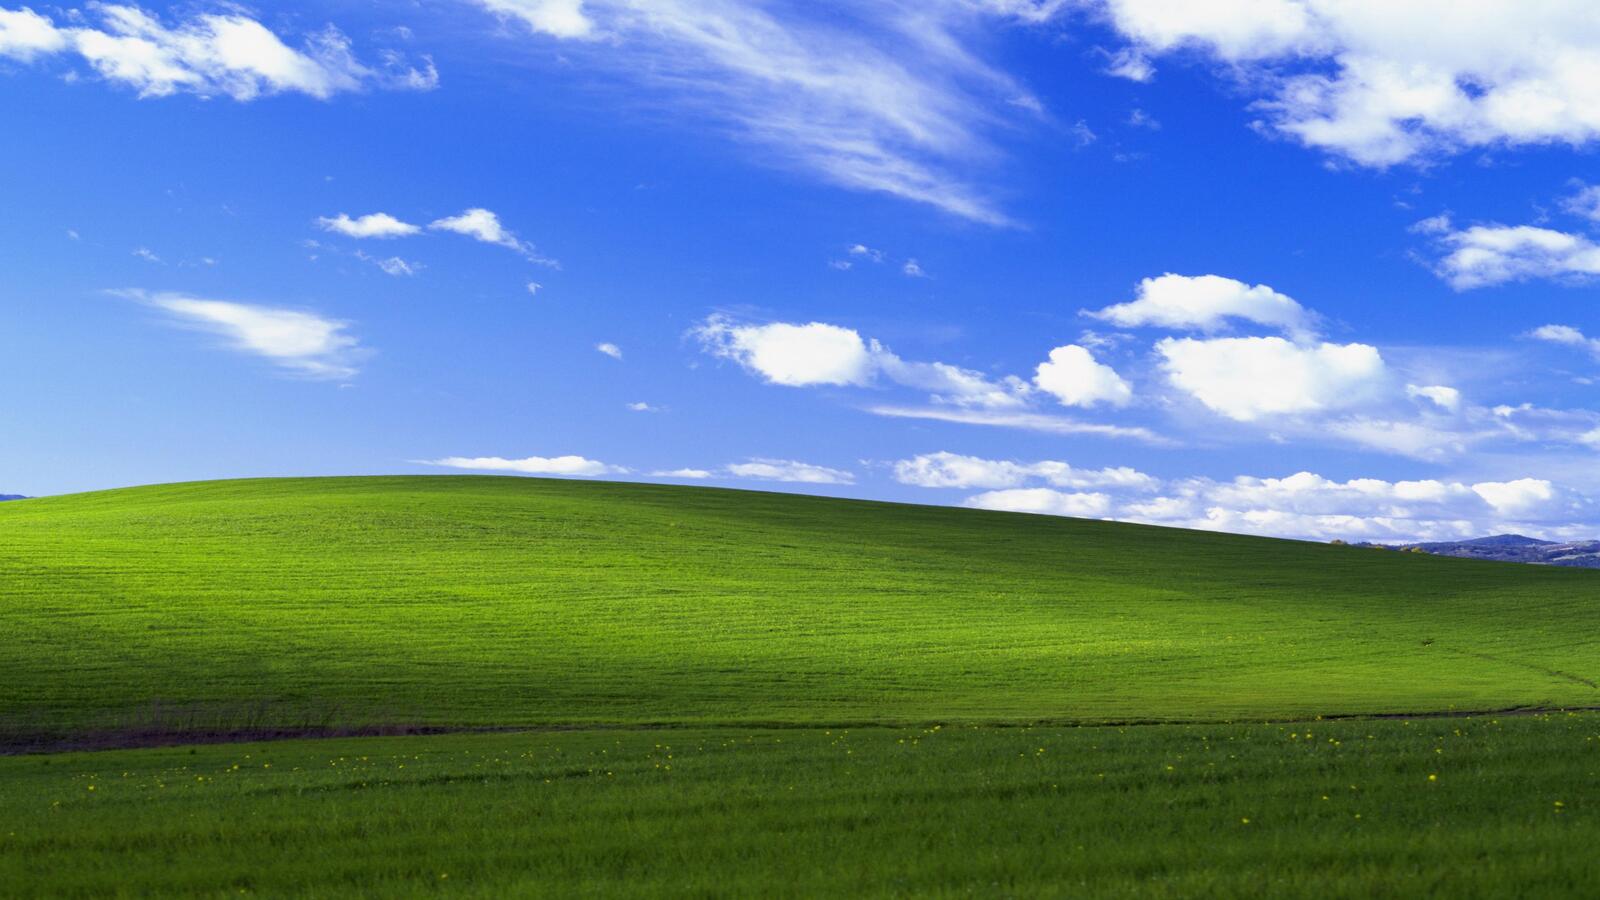 Wallpapers Windows computer simple background on the desktop